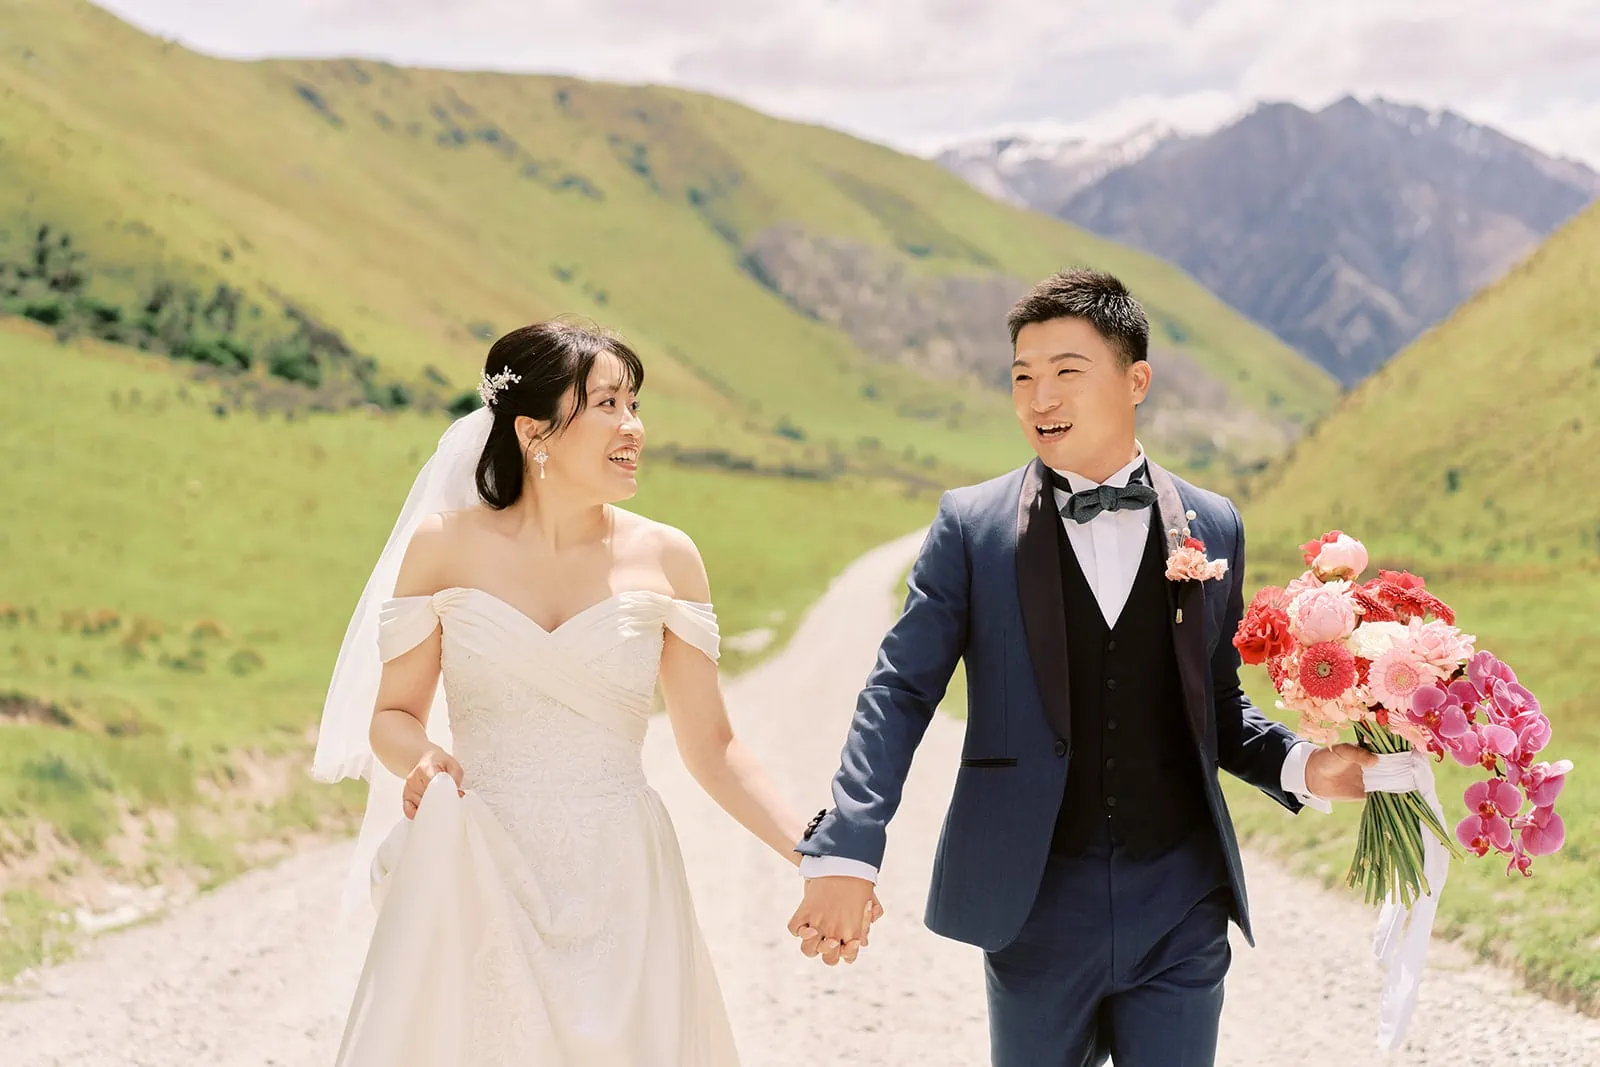 Queenstown Elopement Heli Wedding Photographer クイーンズタウン結婚式 | A couple on a pre-wedding photoshoot, holding hands and blissfully walking on a path with majestic mountains in the background.